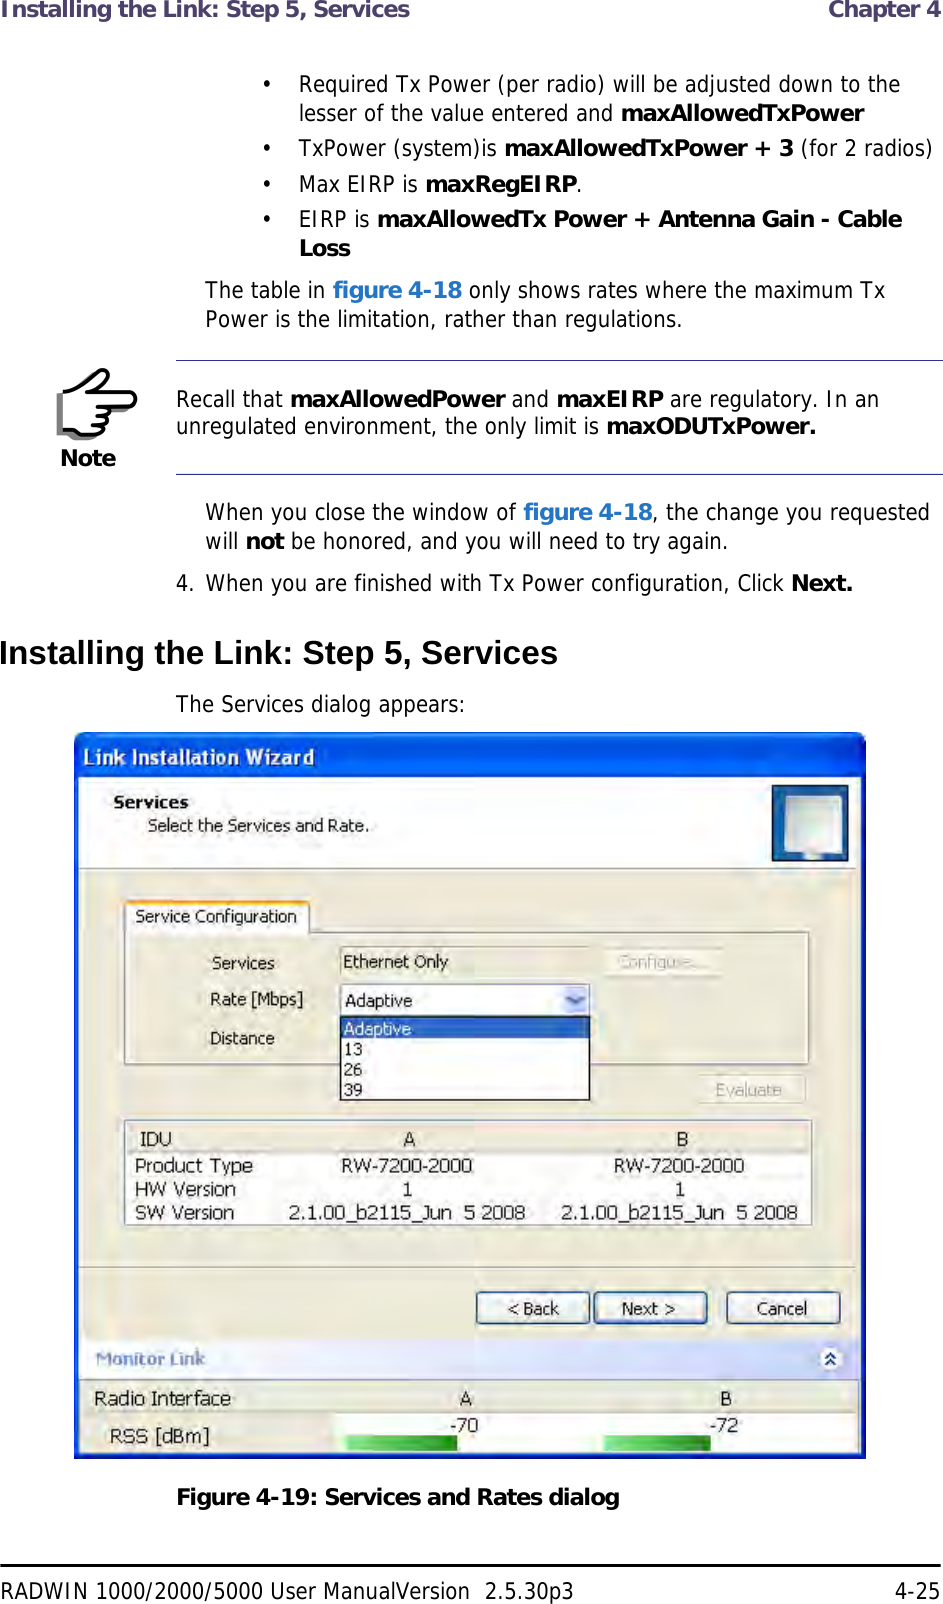 Installing the Link: Step 5, Services  Chapter 4RADWIN 1000/2000/5000 User ManualVersion  2.5.30p3 4-25• Required Tx Power (per radio) will be adjusted down to the lesser of the value entered and maxAllowedTxPower• TxPower (system)is maxAllowedTxPower + 3 (for 2 radios)• Max EIRP is maxRegEIRP.• EIRP is maxAllowedTx Power + Antenna Gain - Cable LossThe table in figure 4-18 only shows rates where the maximum Tx Power is the limitation, rather than regulations.When you close the window of figure 4-18, the change you requested will not be honored, and you will need to try again.4. When you are finished with Tx Power configuration, Click Next.Installing the Link: Step 5, ServicesThe Services dialog appears:Figure 4-19: Services and Rates dialogNoteRecall that maxAllowedPower and maxEIRP are regulatory. In an unregulated environment, the only limit is maxODUTxPower.